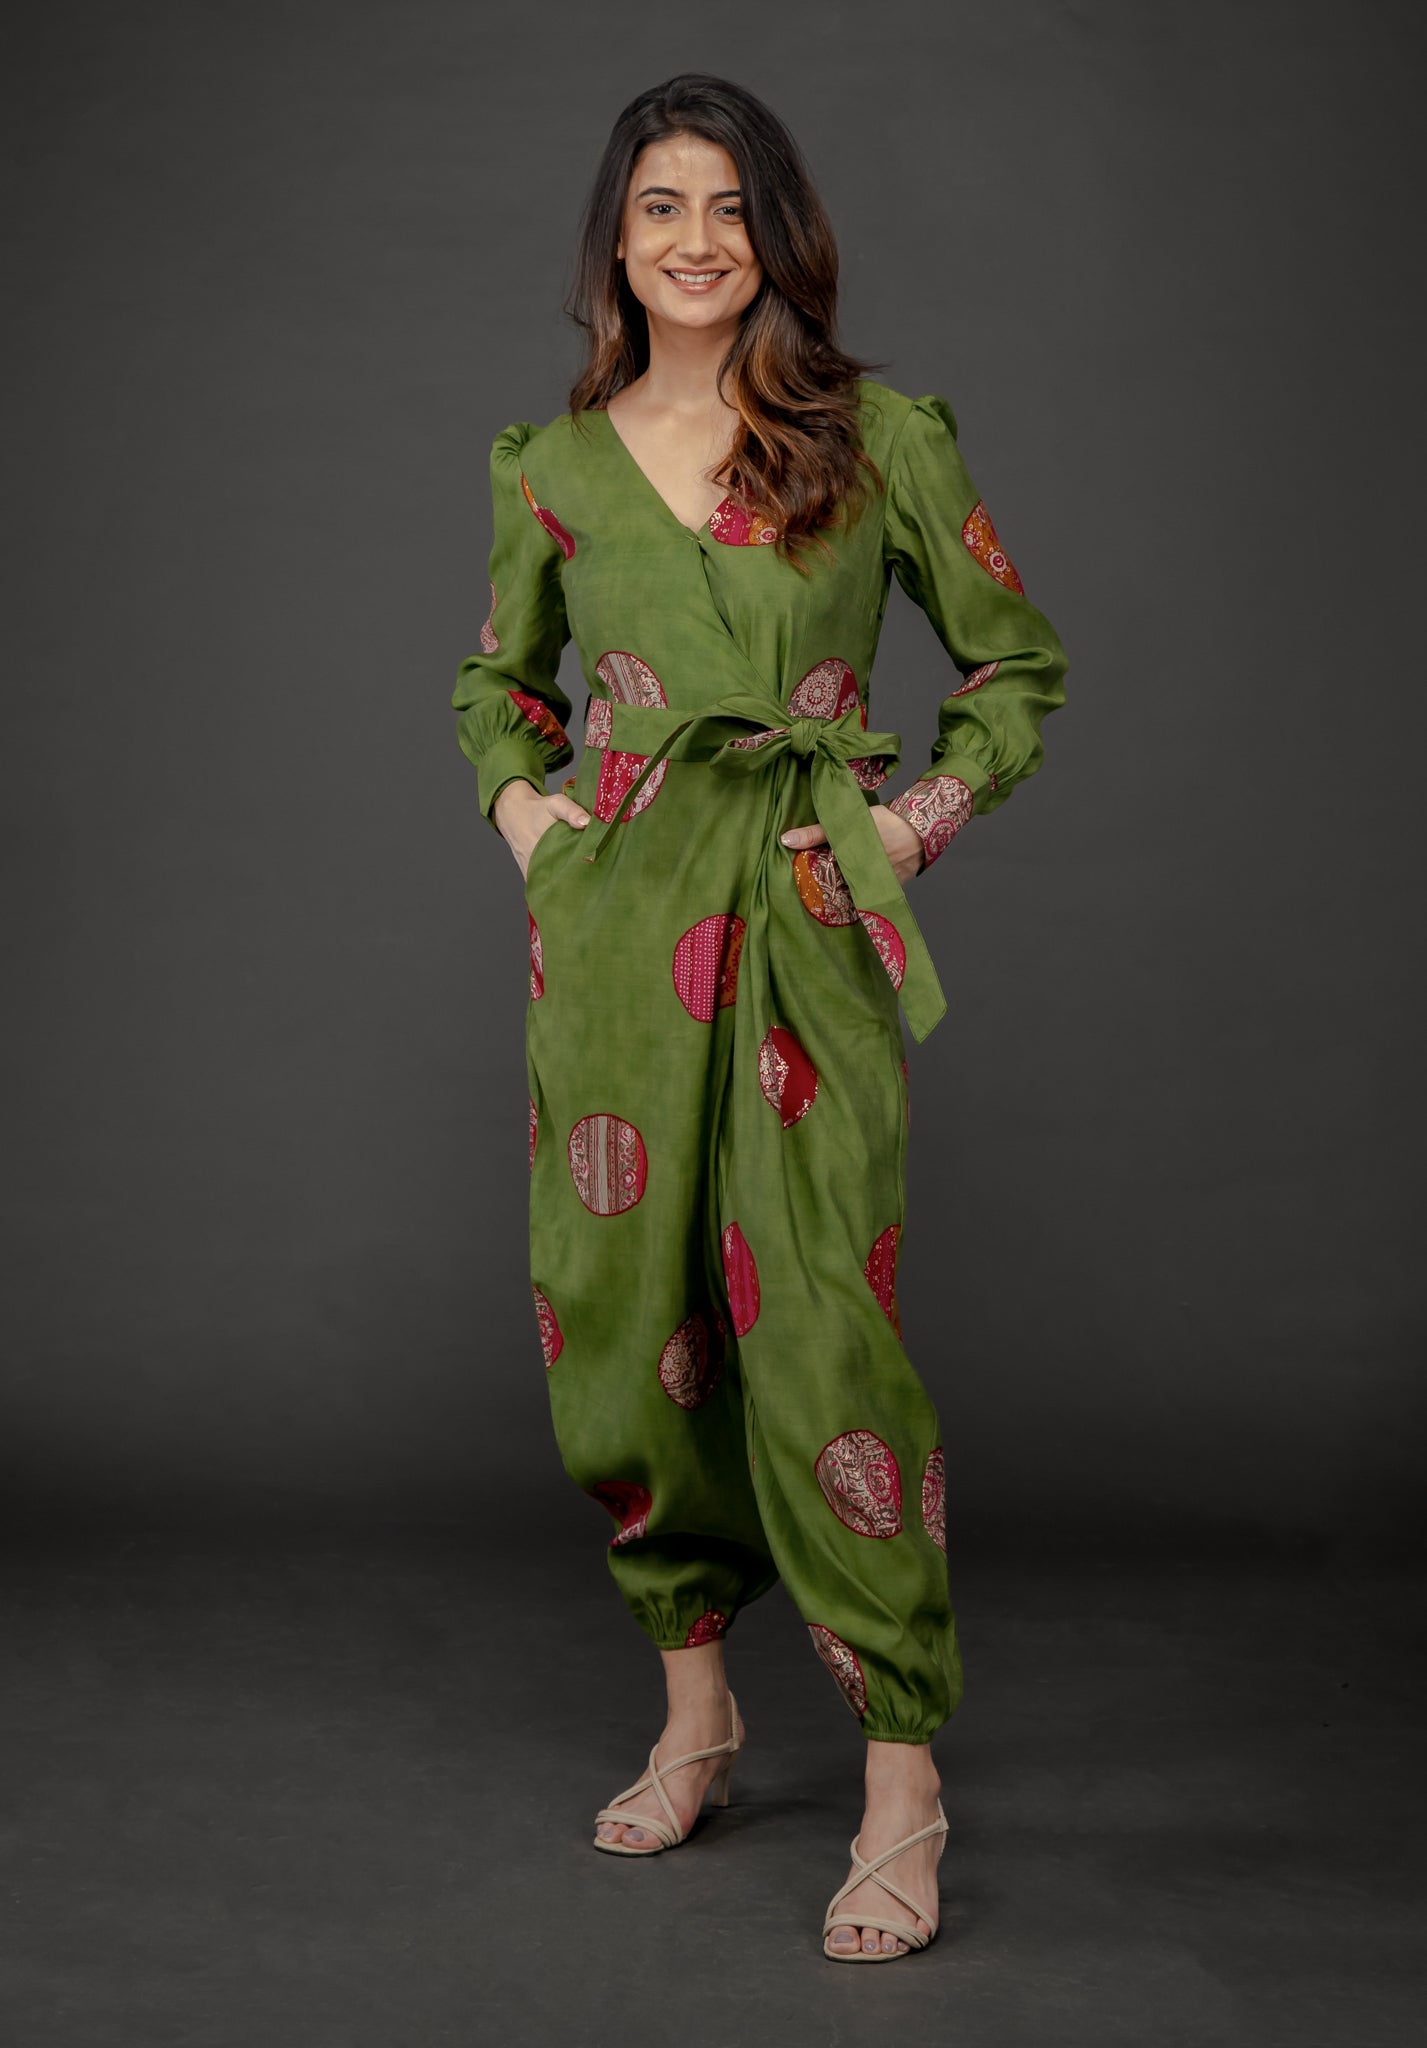 GREEN GOLD FOIL OVERLAY JUMPSUIT WITH CUFFED SLEEVE